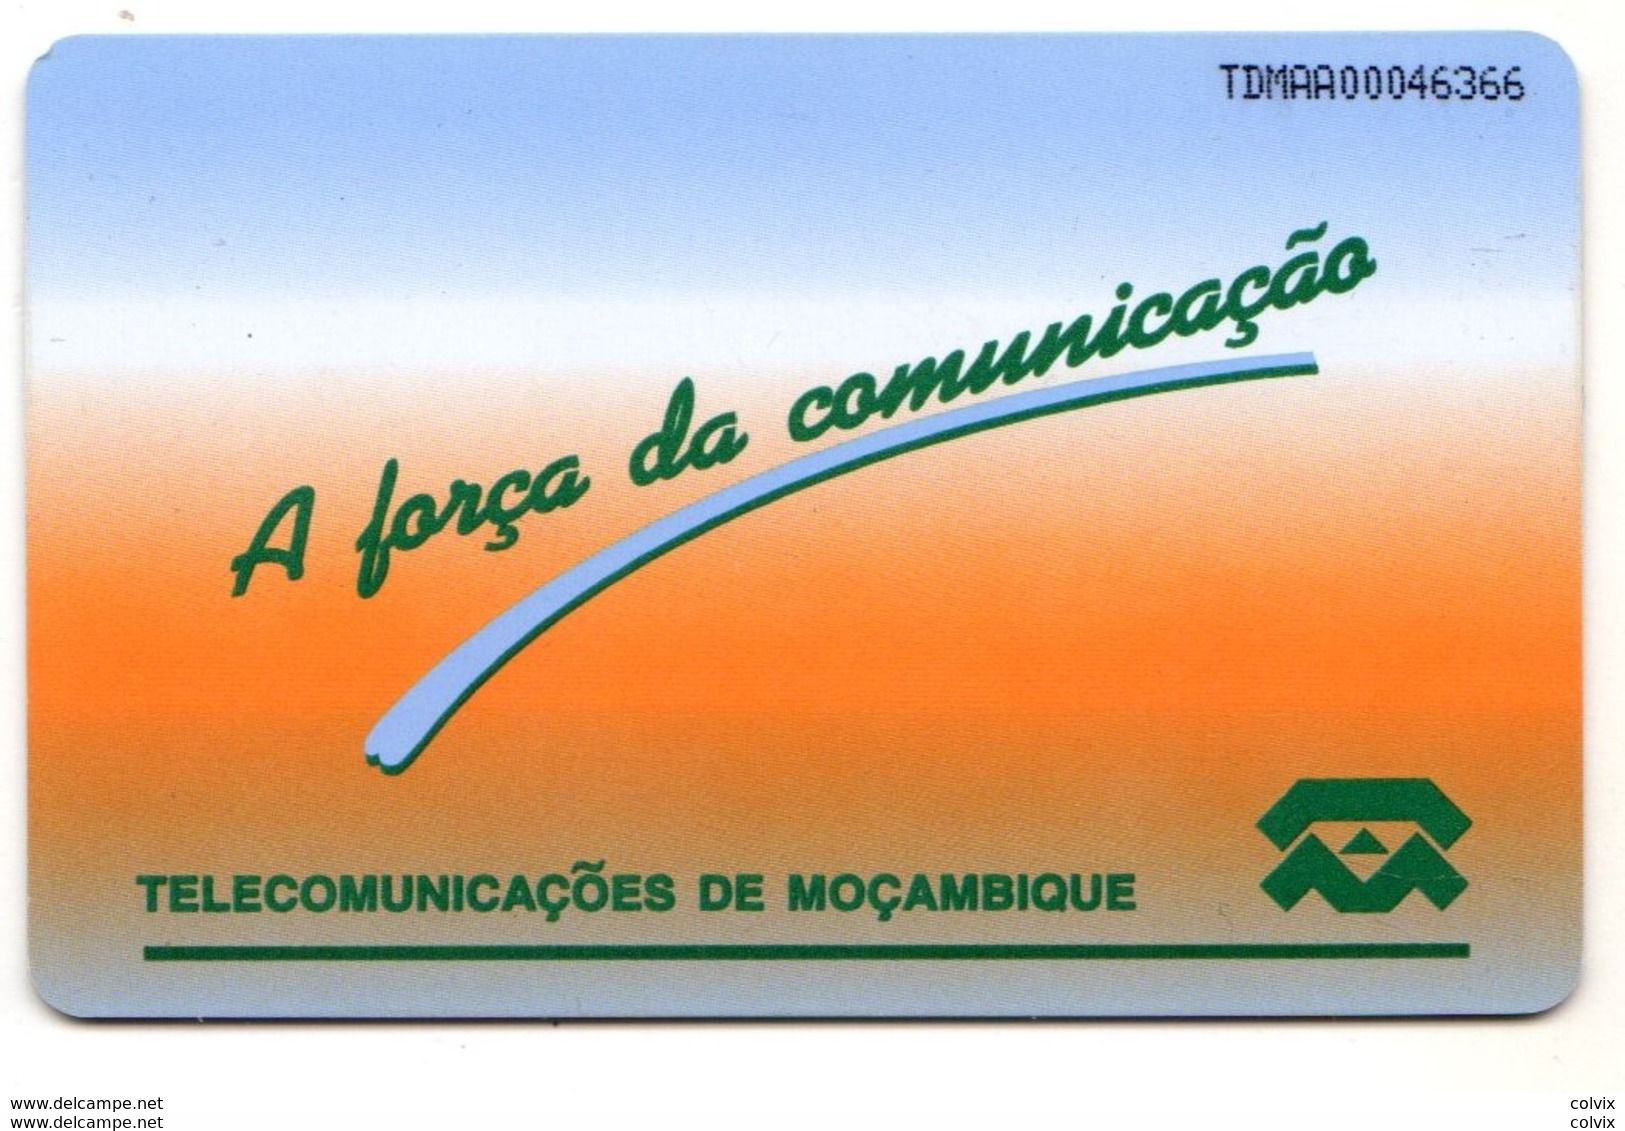 MOZAMBIQUE REF MV CARDS MZB-01 50 000MT1997 Instructions Of Use 1 - Moçambique